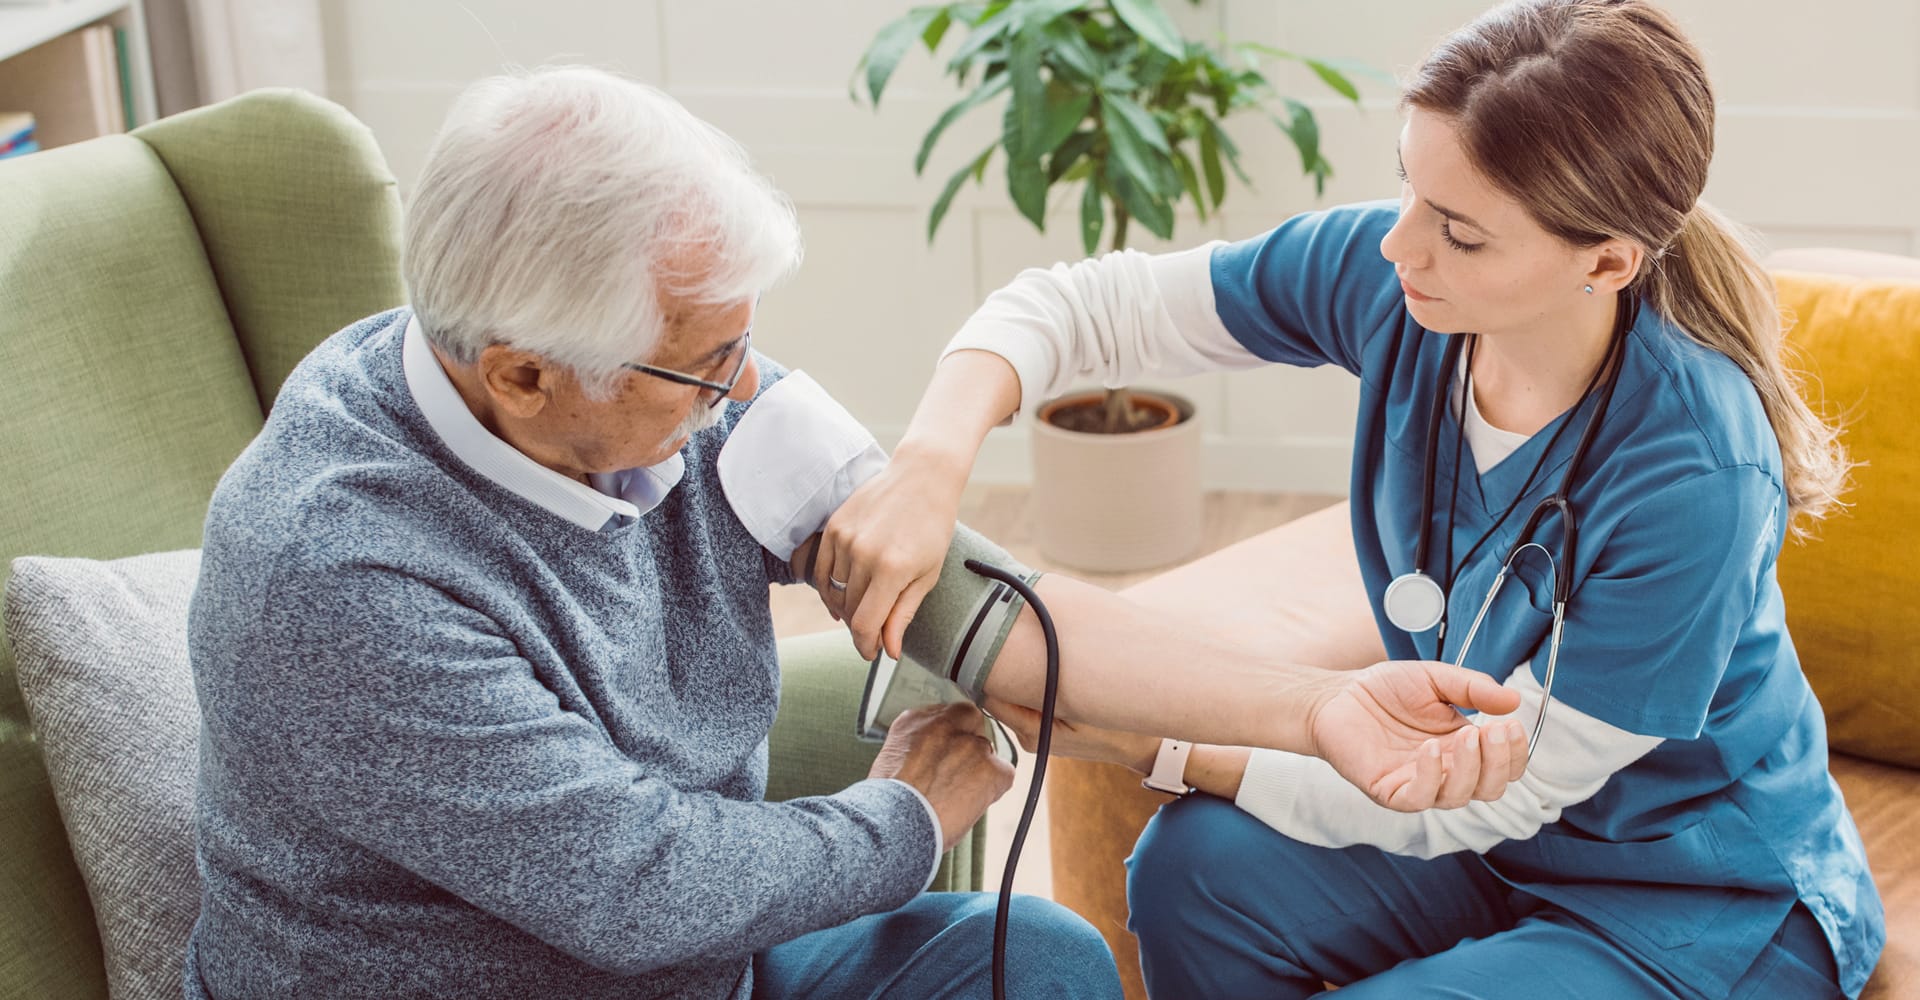 A health care provider checking the blood pressure of a senior patient